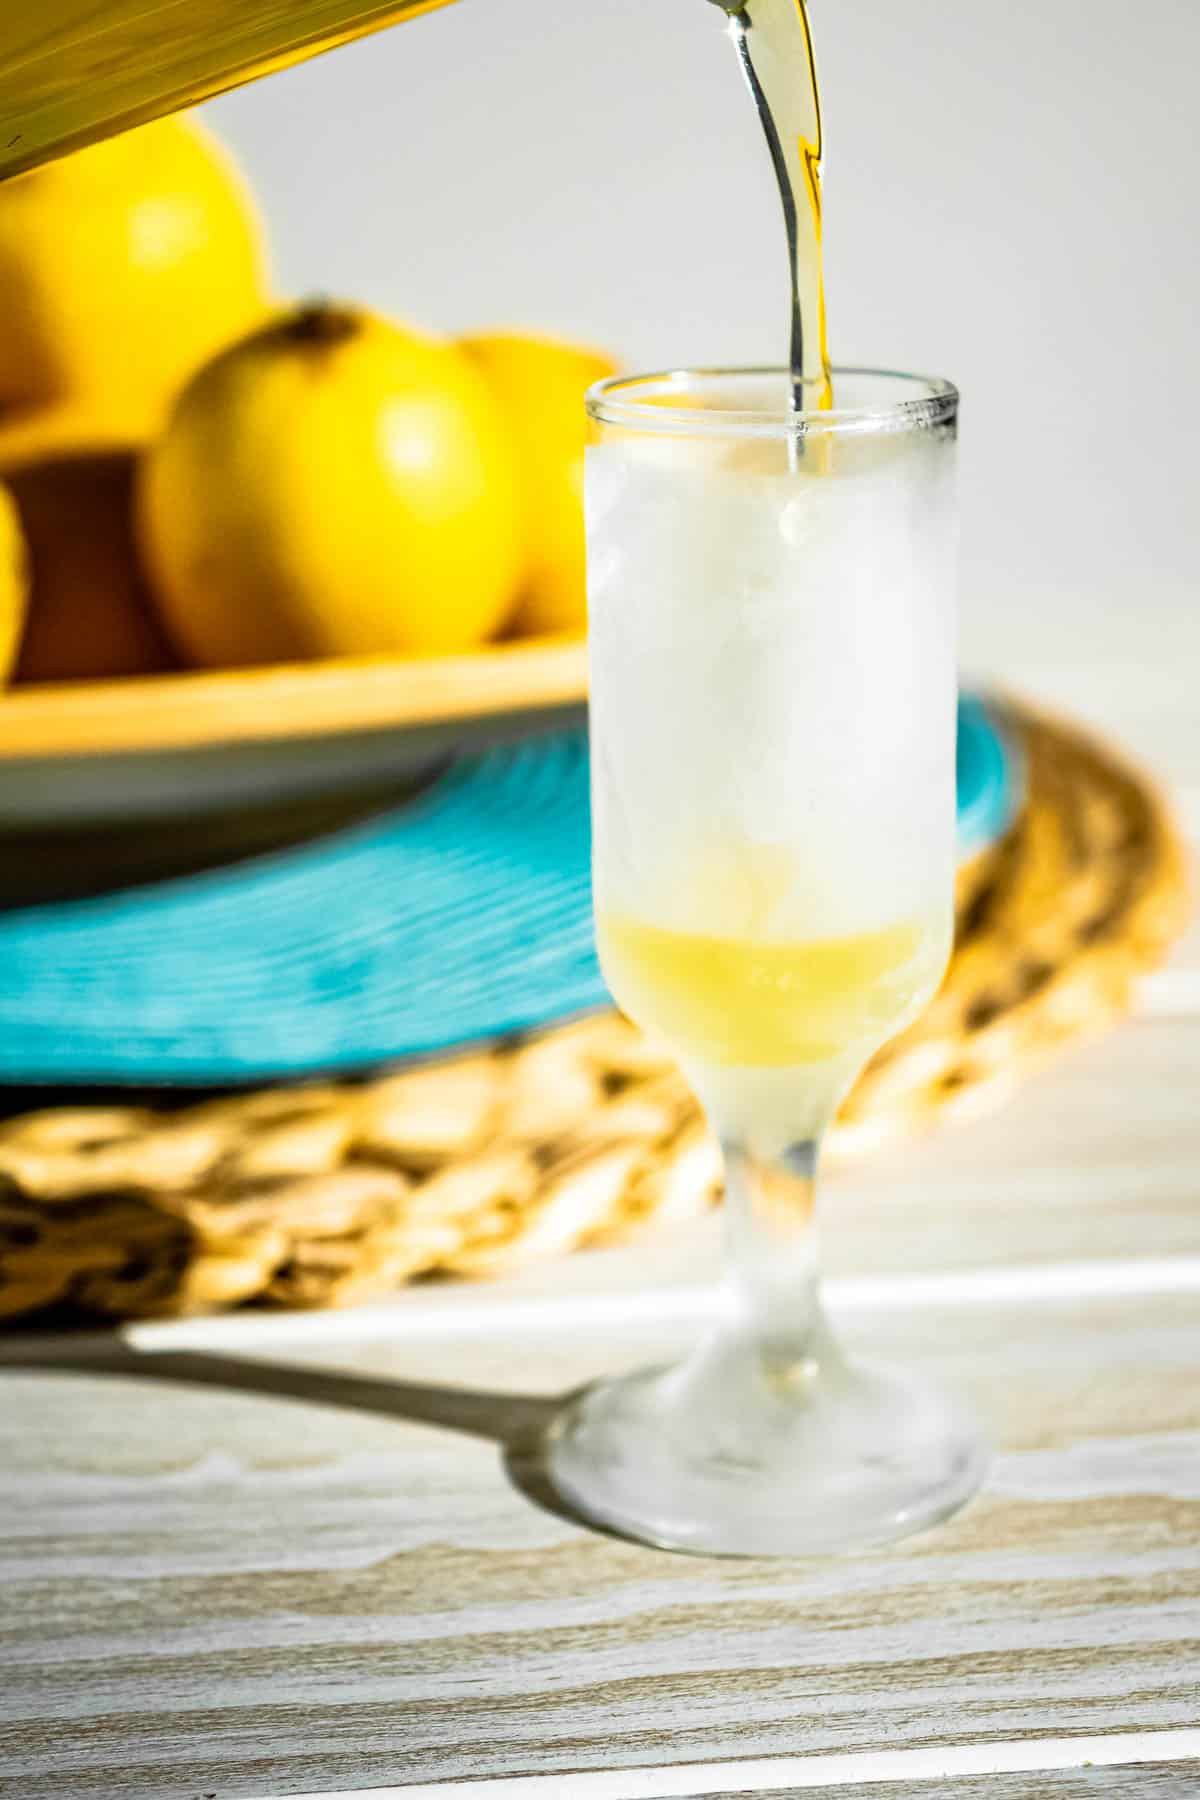 limoncello being poured into a glass.